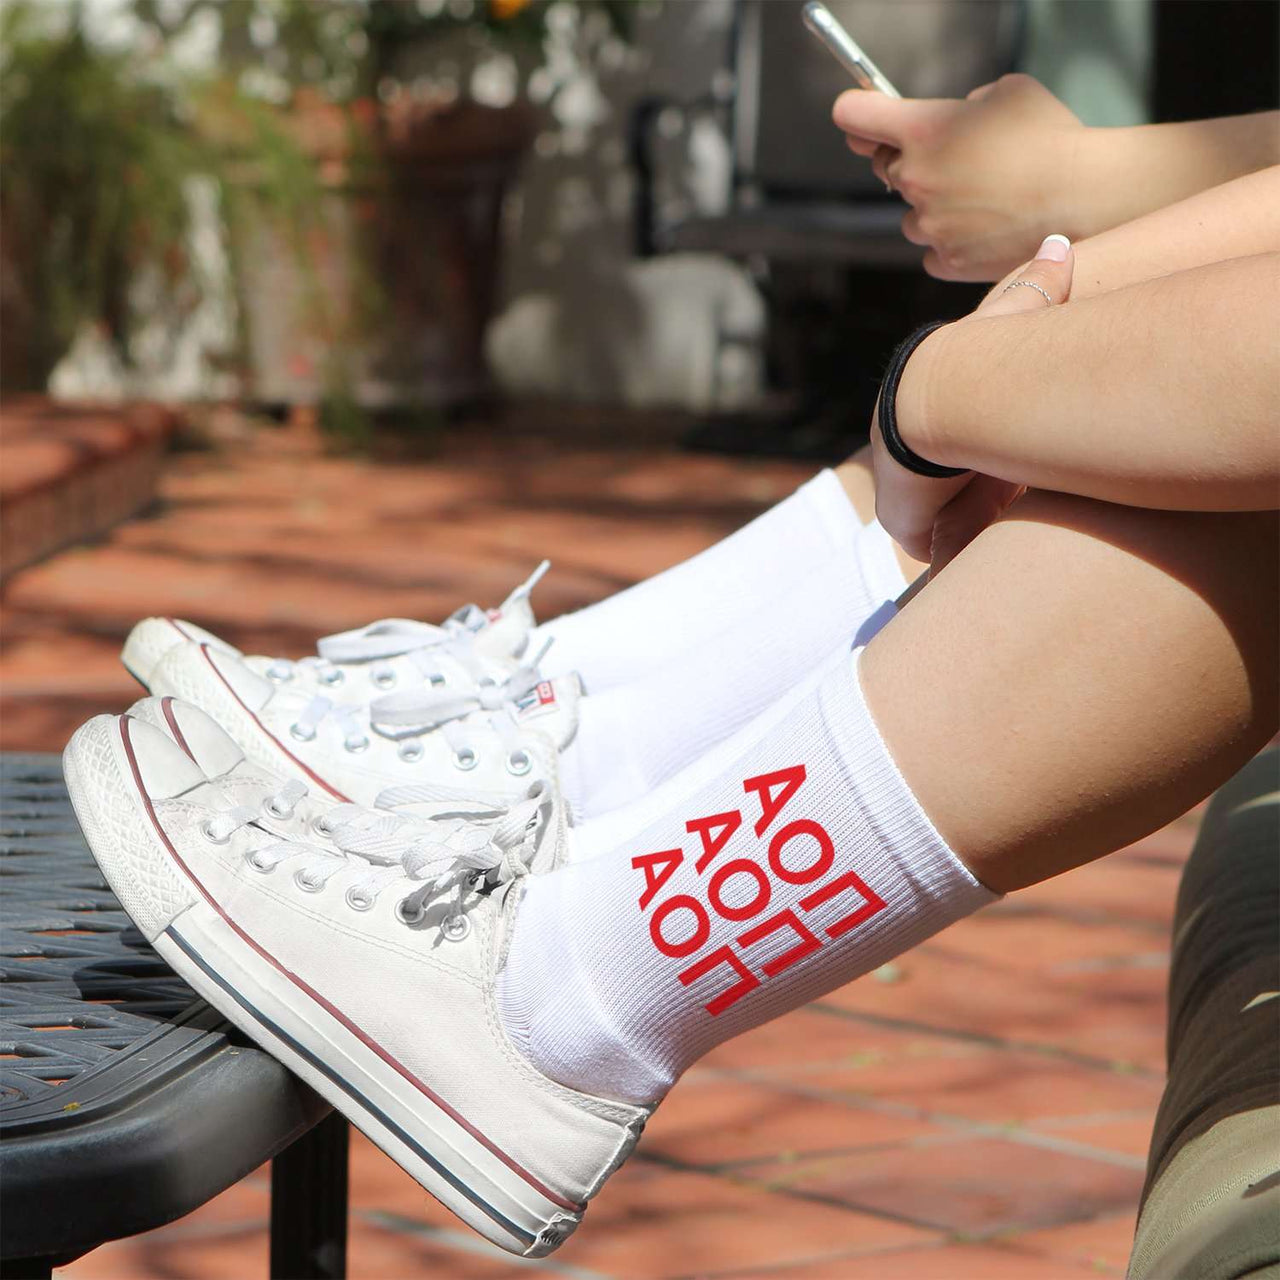 Alpha Omicron Pi sorority letters in repeating pattern custom printed on white cotton crew socks